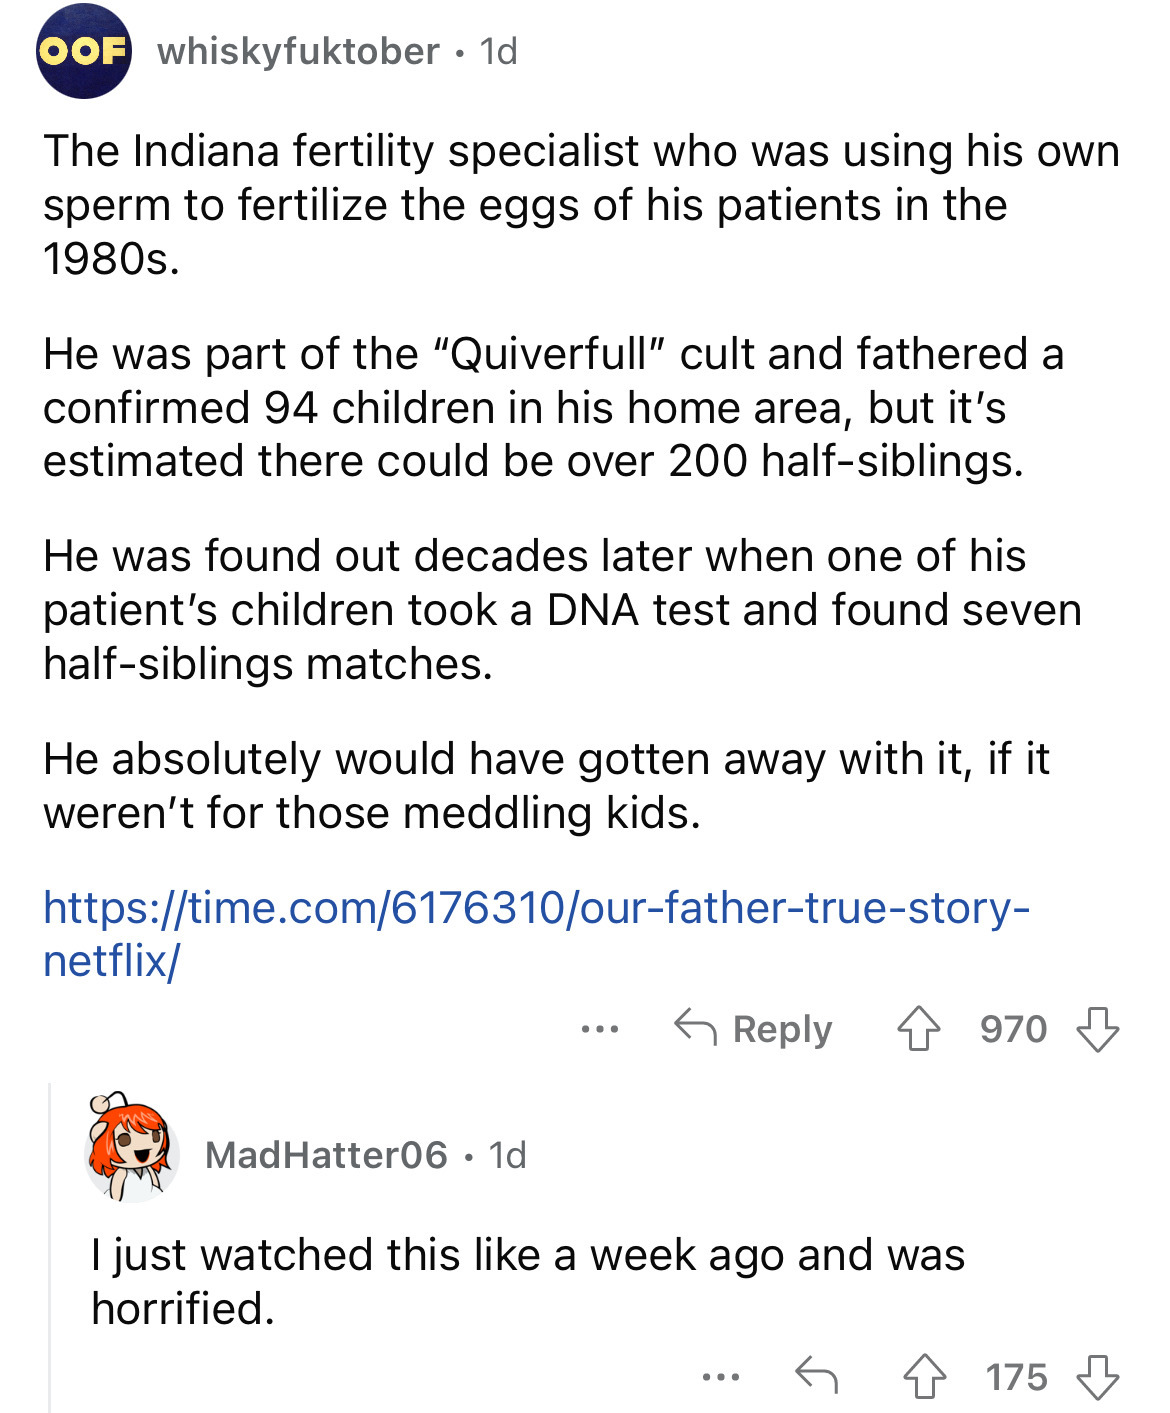 document - Oof whiskyfuktober 1d The Indiana fertility specialist who was using his own sperm to fertilize the eggs of his patients in the 1980s. He was part of the "Quiverfull" cult and fathered a confirmed 94 children in his home area, but it's estimate